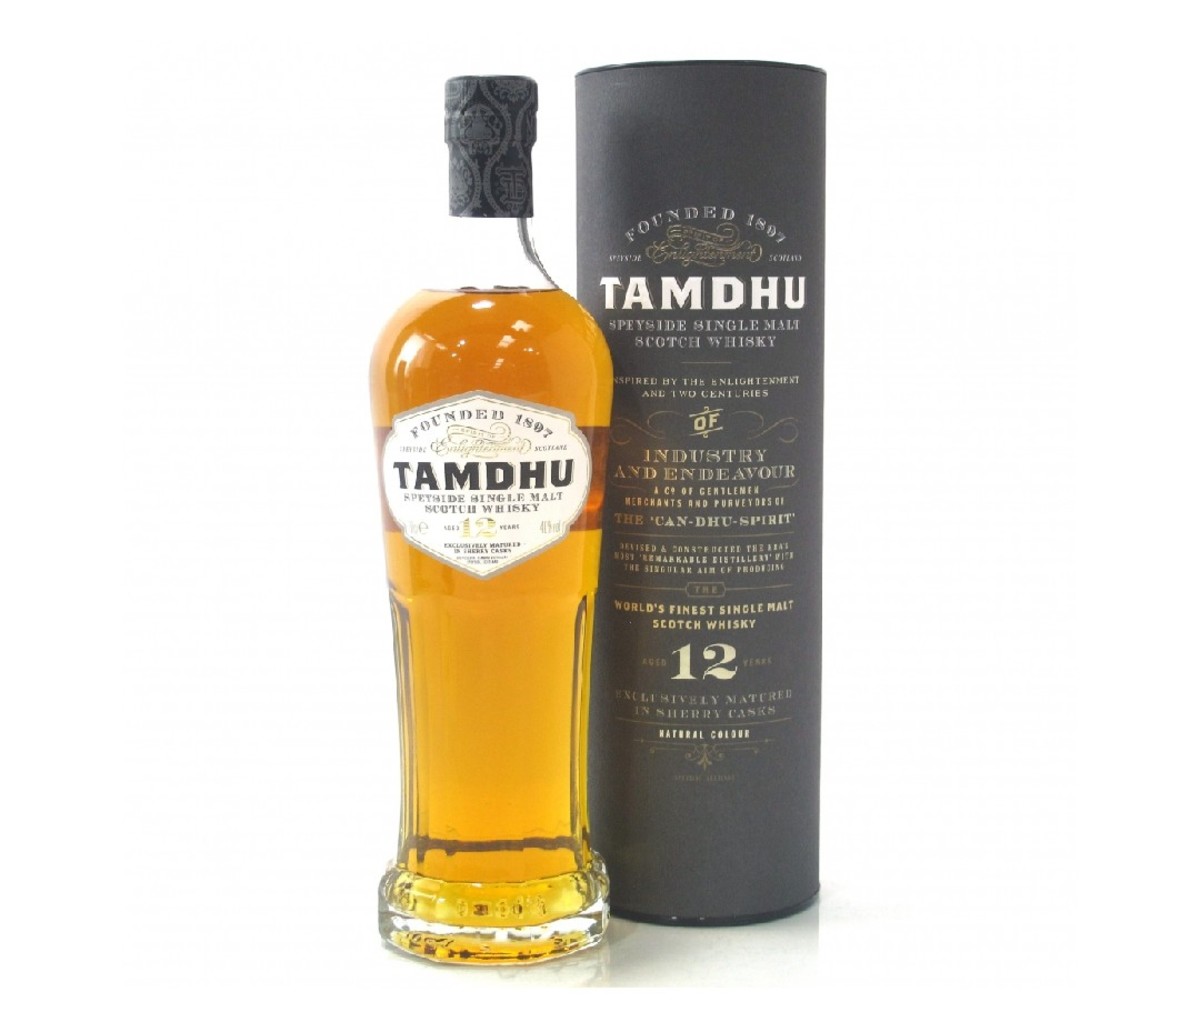 A bottle of Tamdhu 12 Year Old whisky.